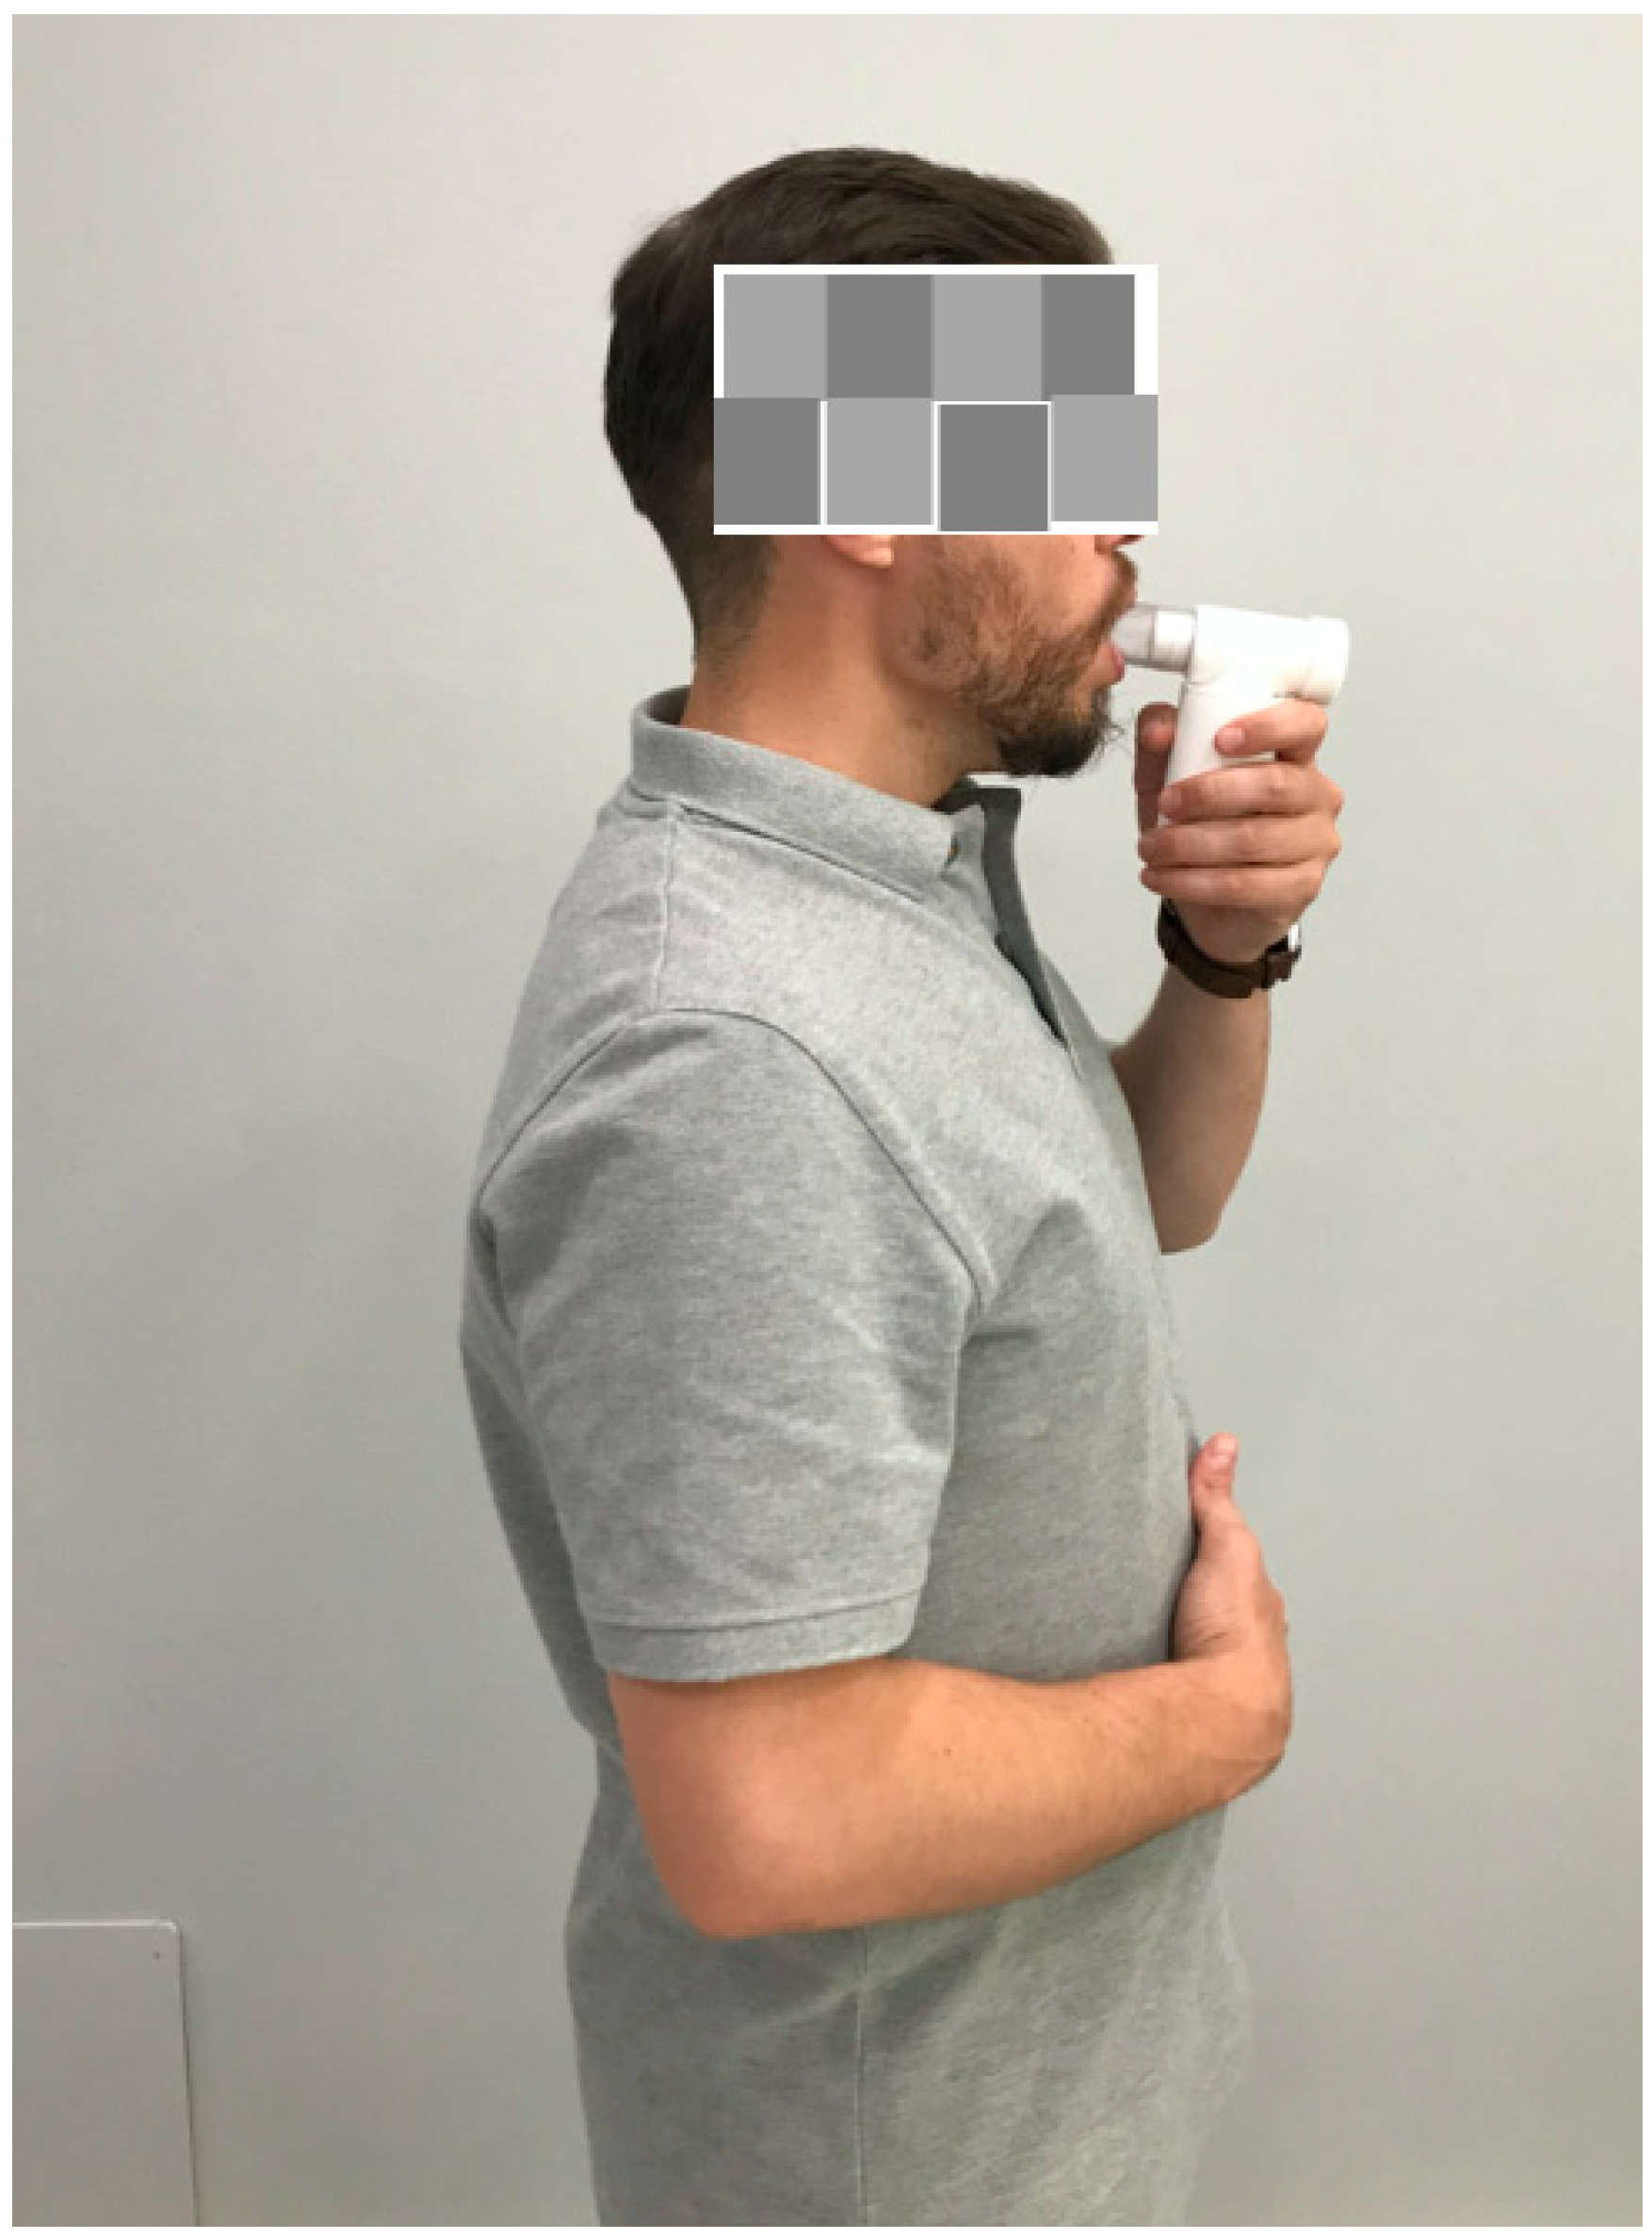 JCM Free Full-Text Effectiveness of Ultrasonography Visual Biofeedback of the Diaphragm in Conjunction with Inspiratory Muscle Training on Muscle Thickness, Respiratory Pressures, Pain, Disability, Quality of Life and Pulmonary Function picture picture